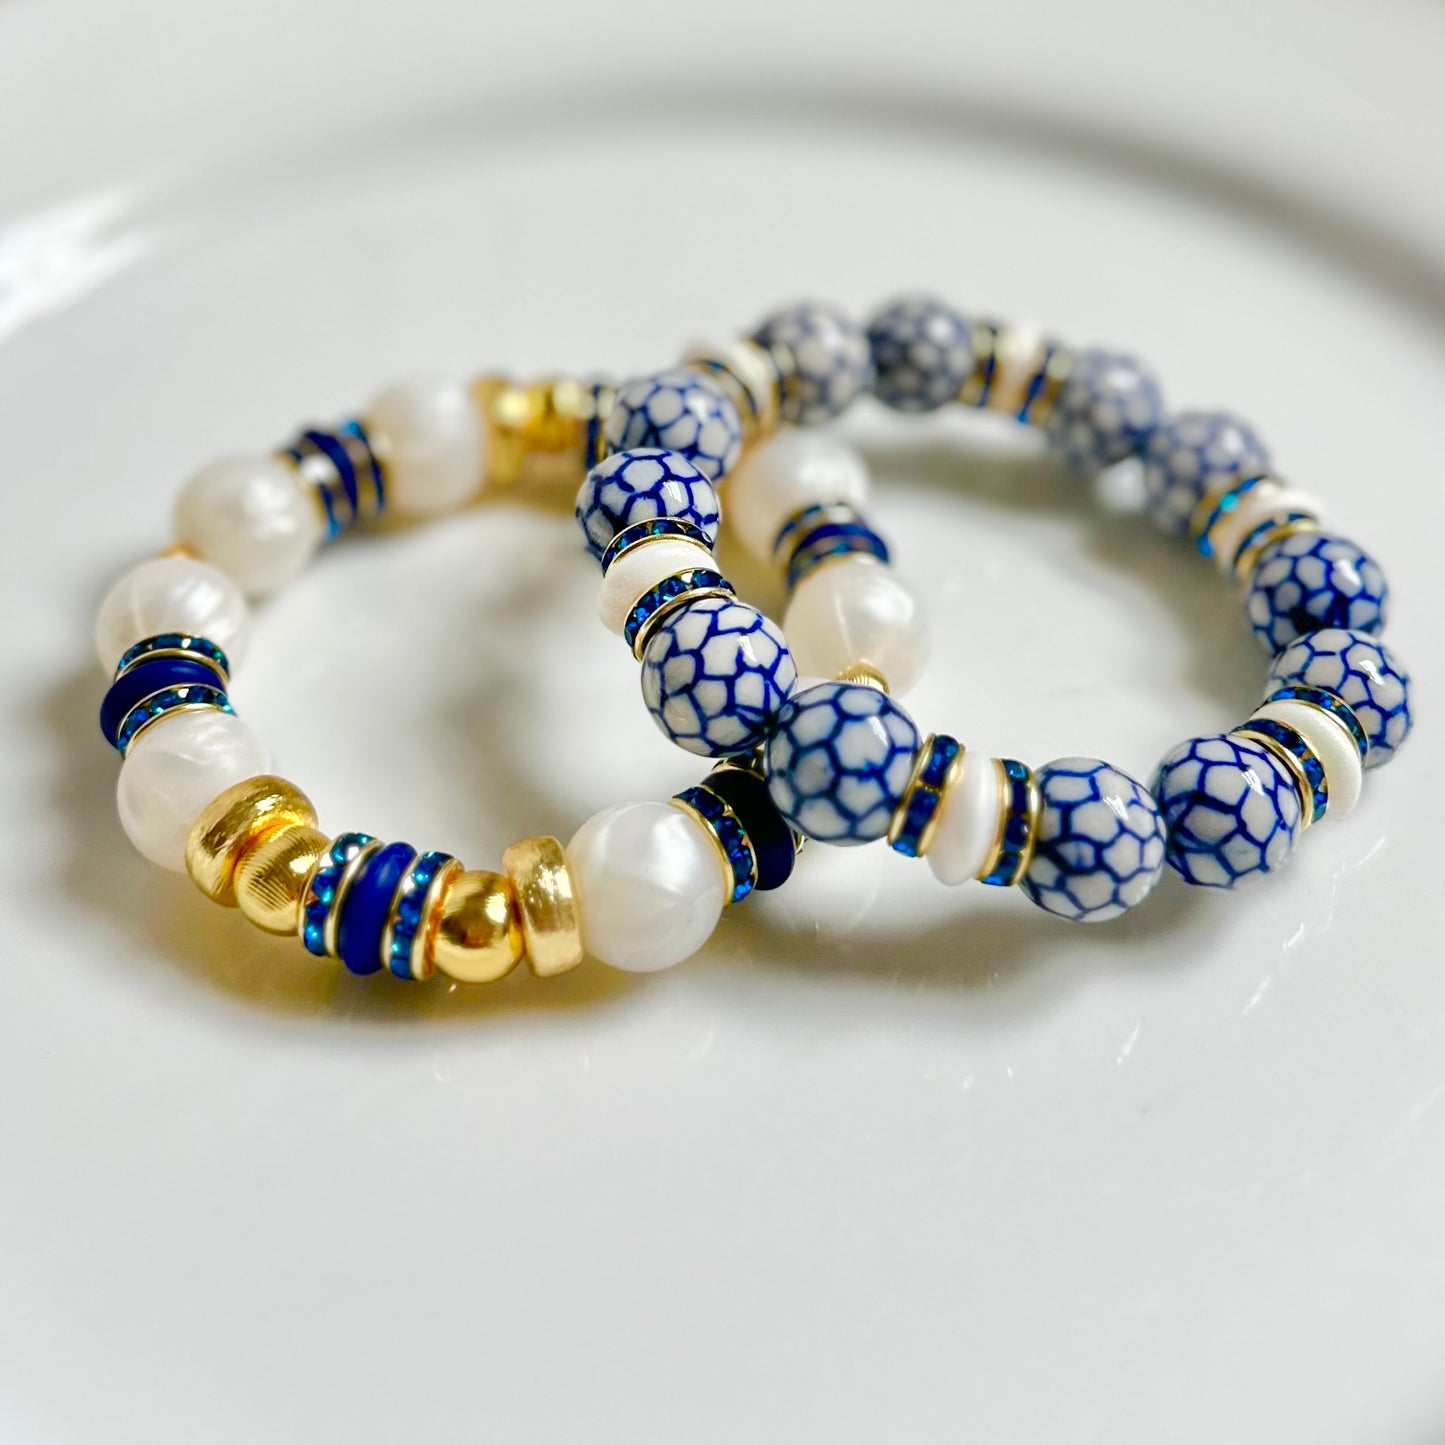 PEARLIZED IVORY BANGLE WITH DARK BLUE AND CZ ACCENTS